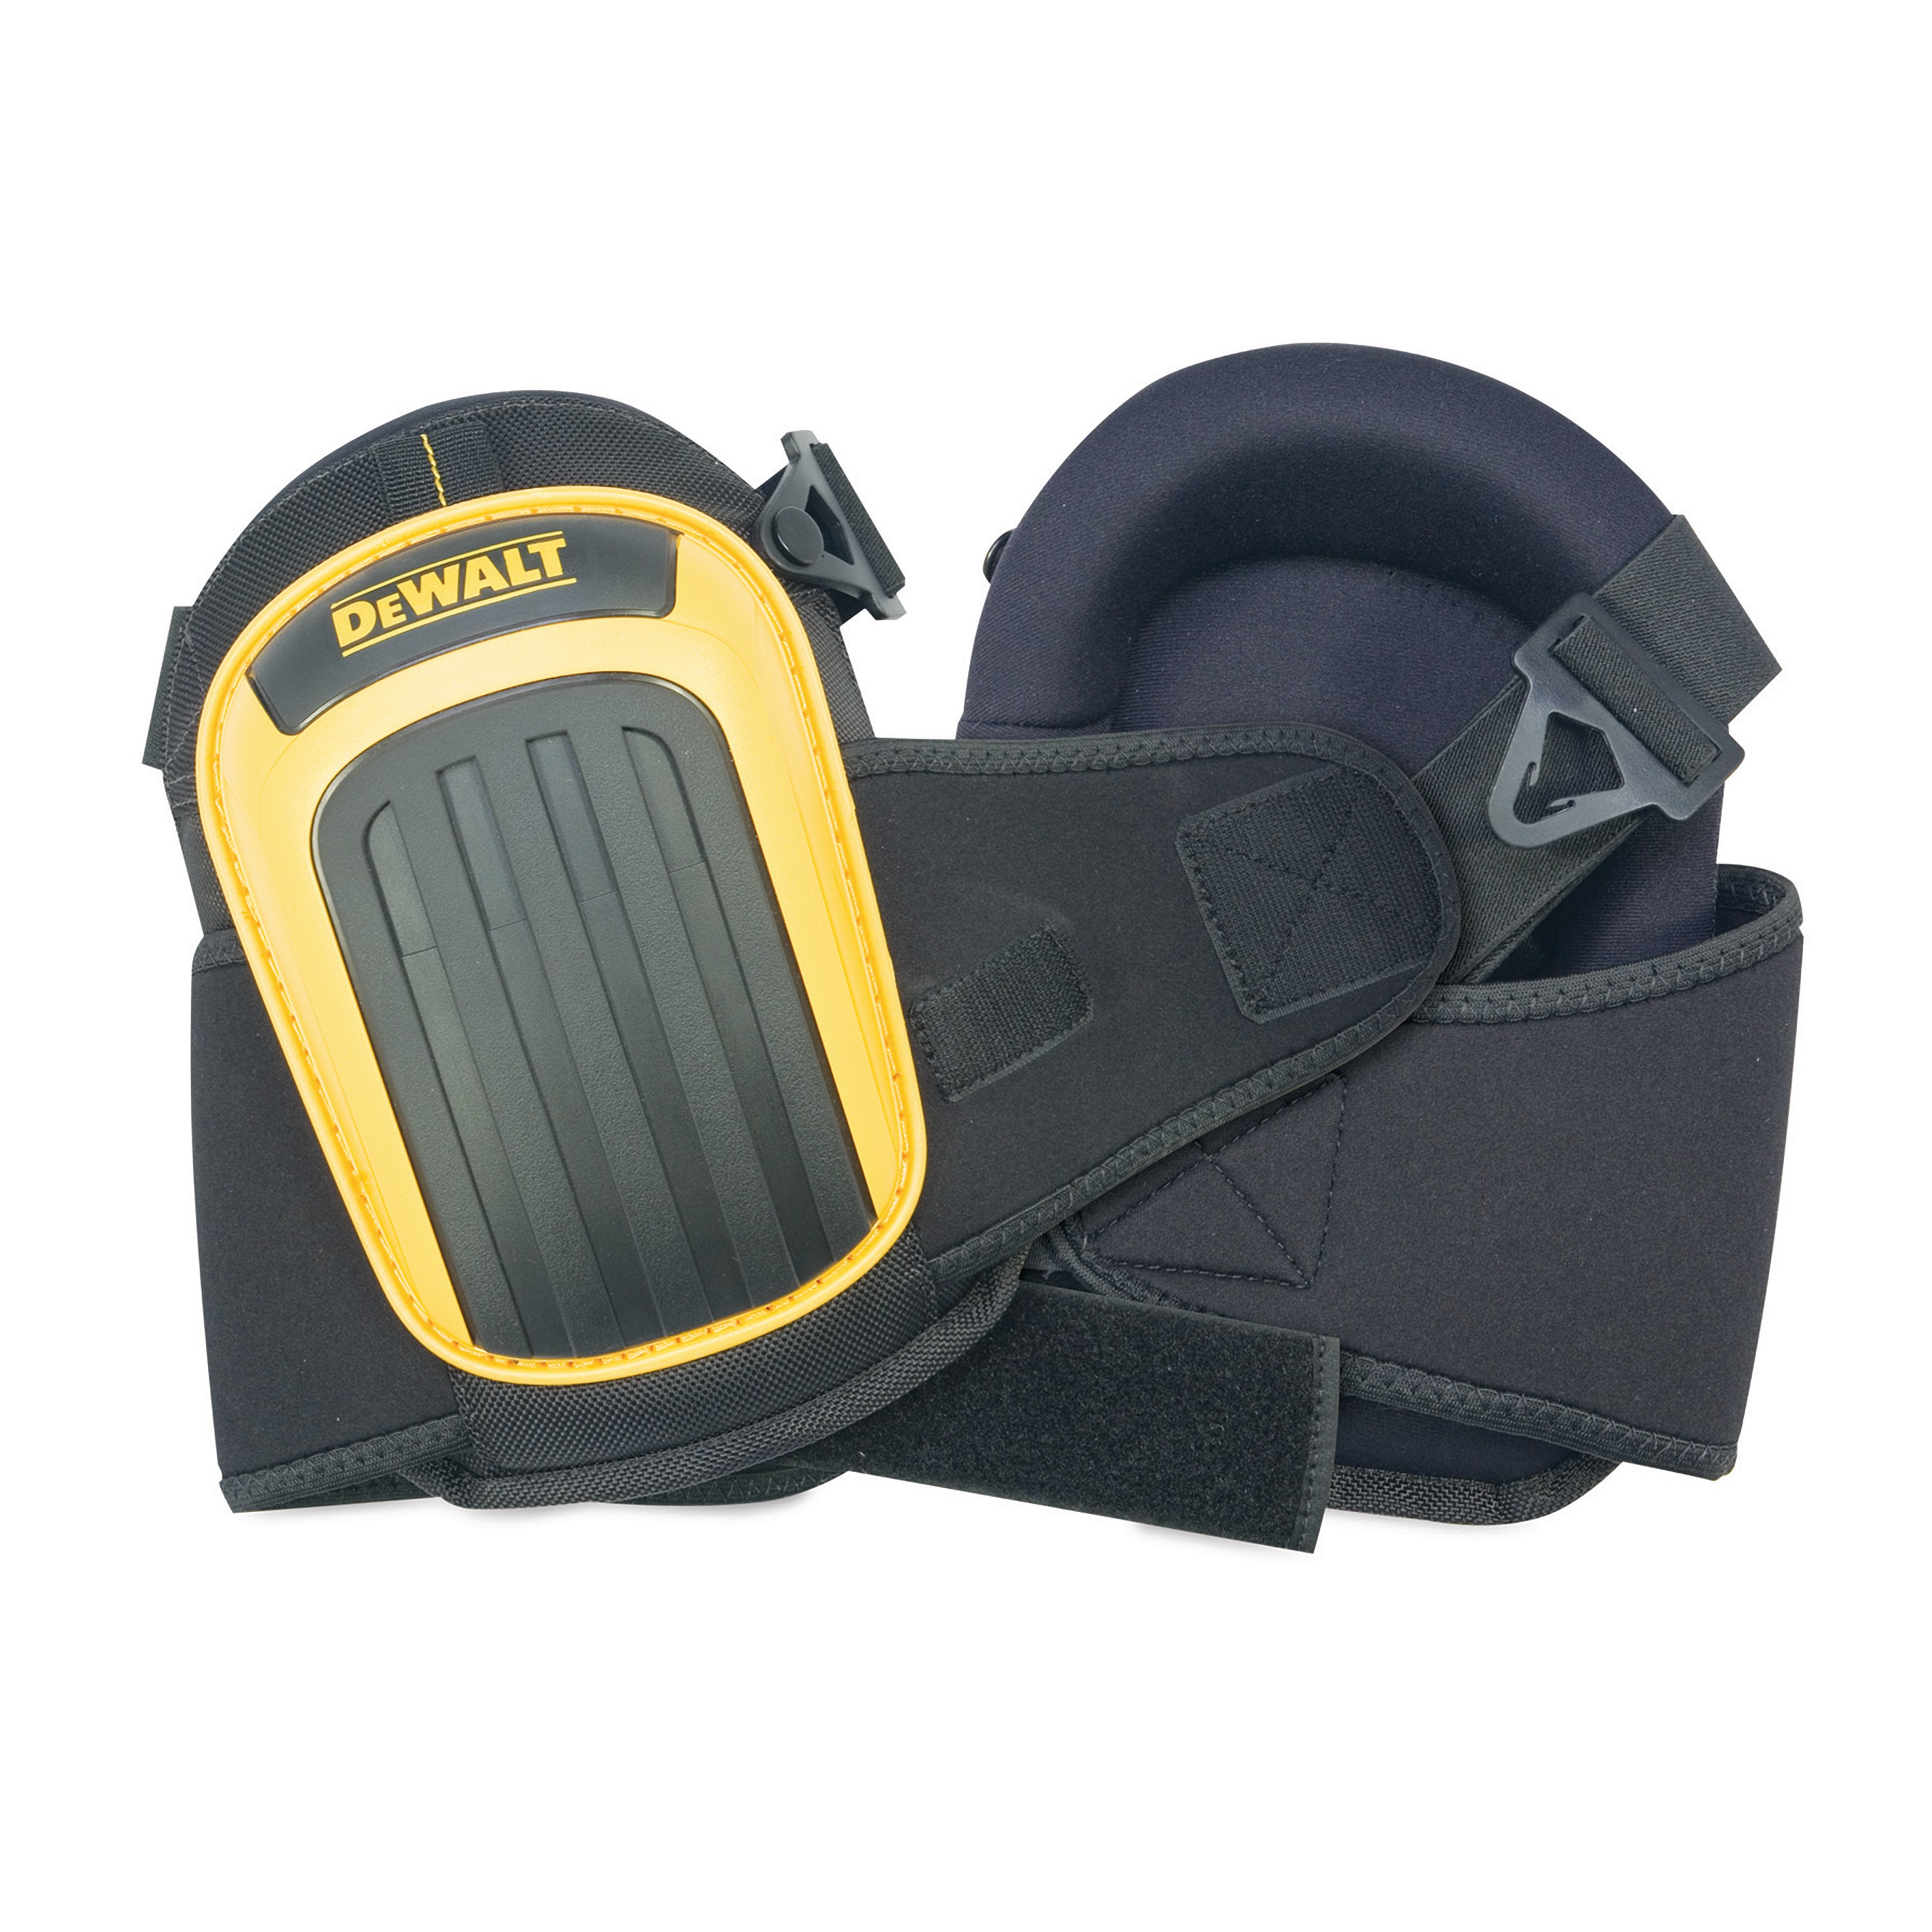 profile of Heavy Duty Smooth Cap Kneepads.